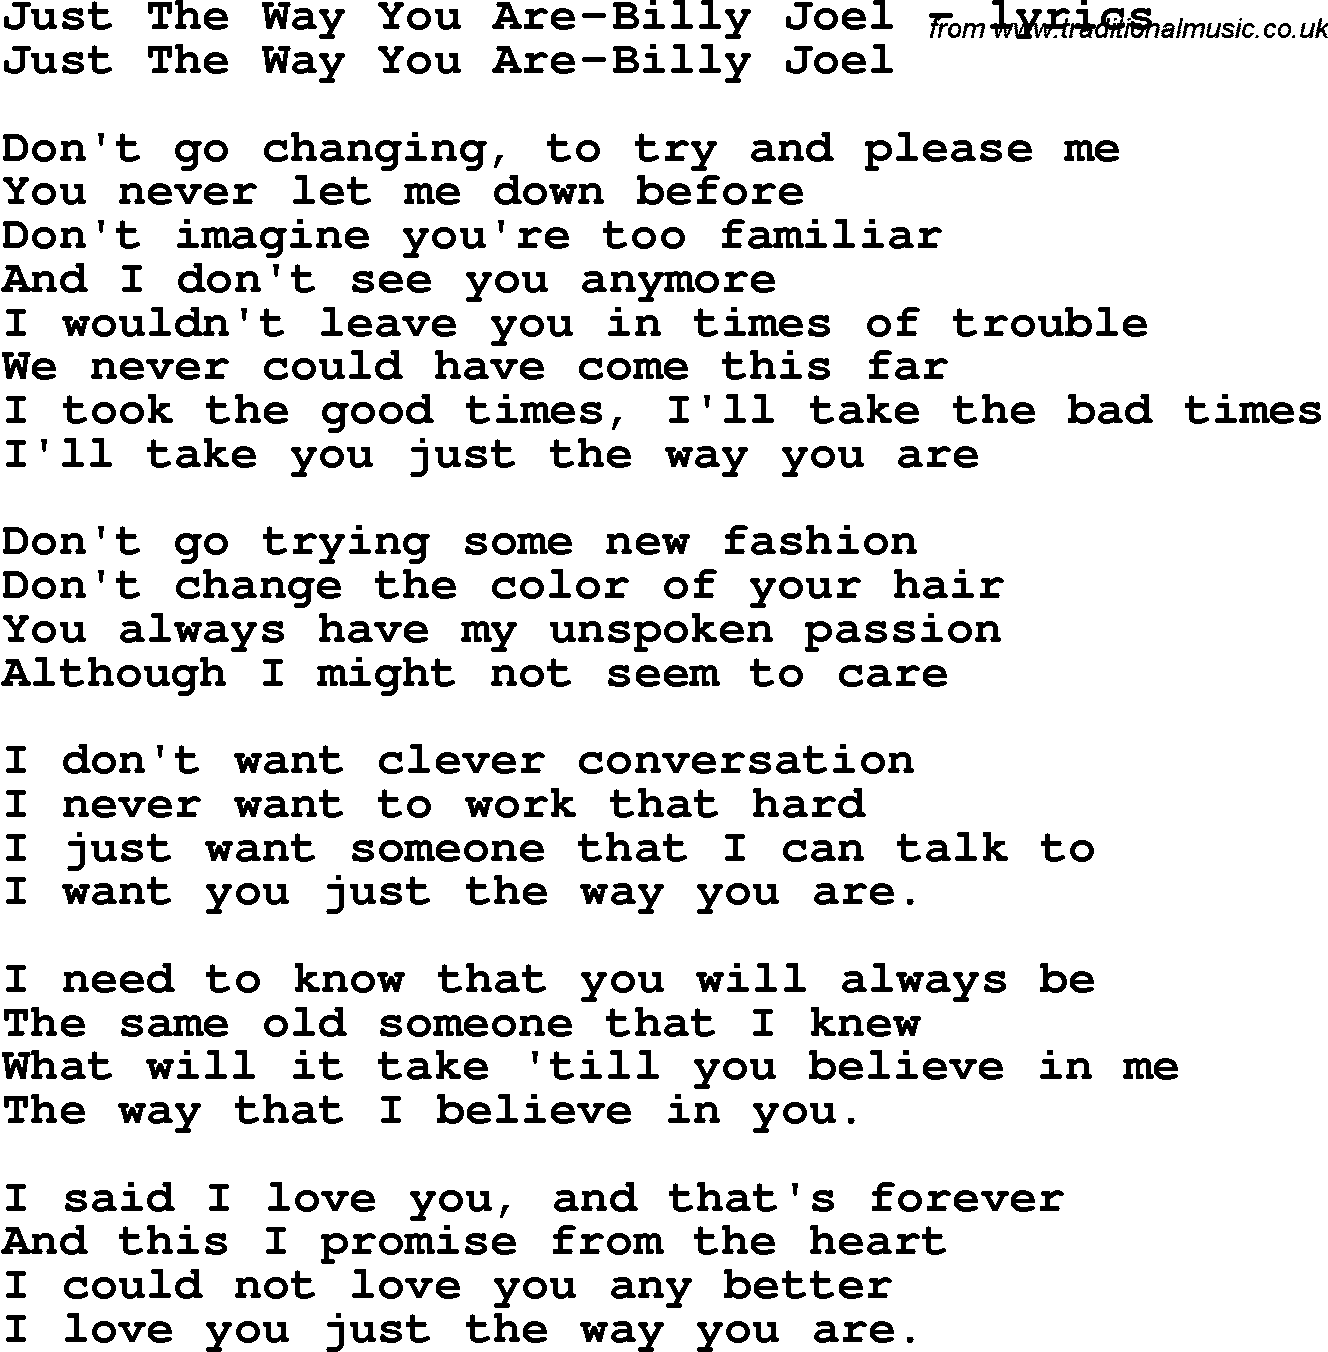 Love Song Lyrics for: Just The Way You Are-Billy Joel